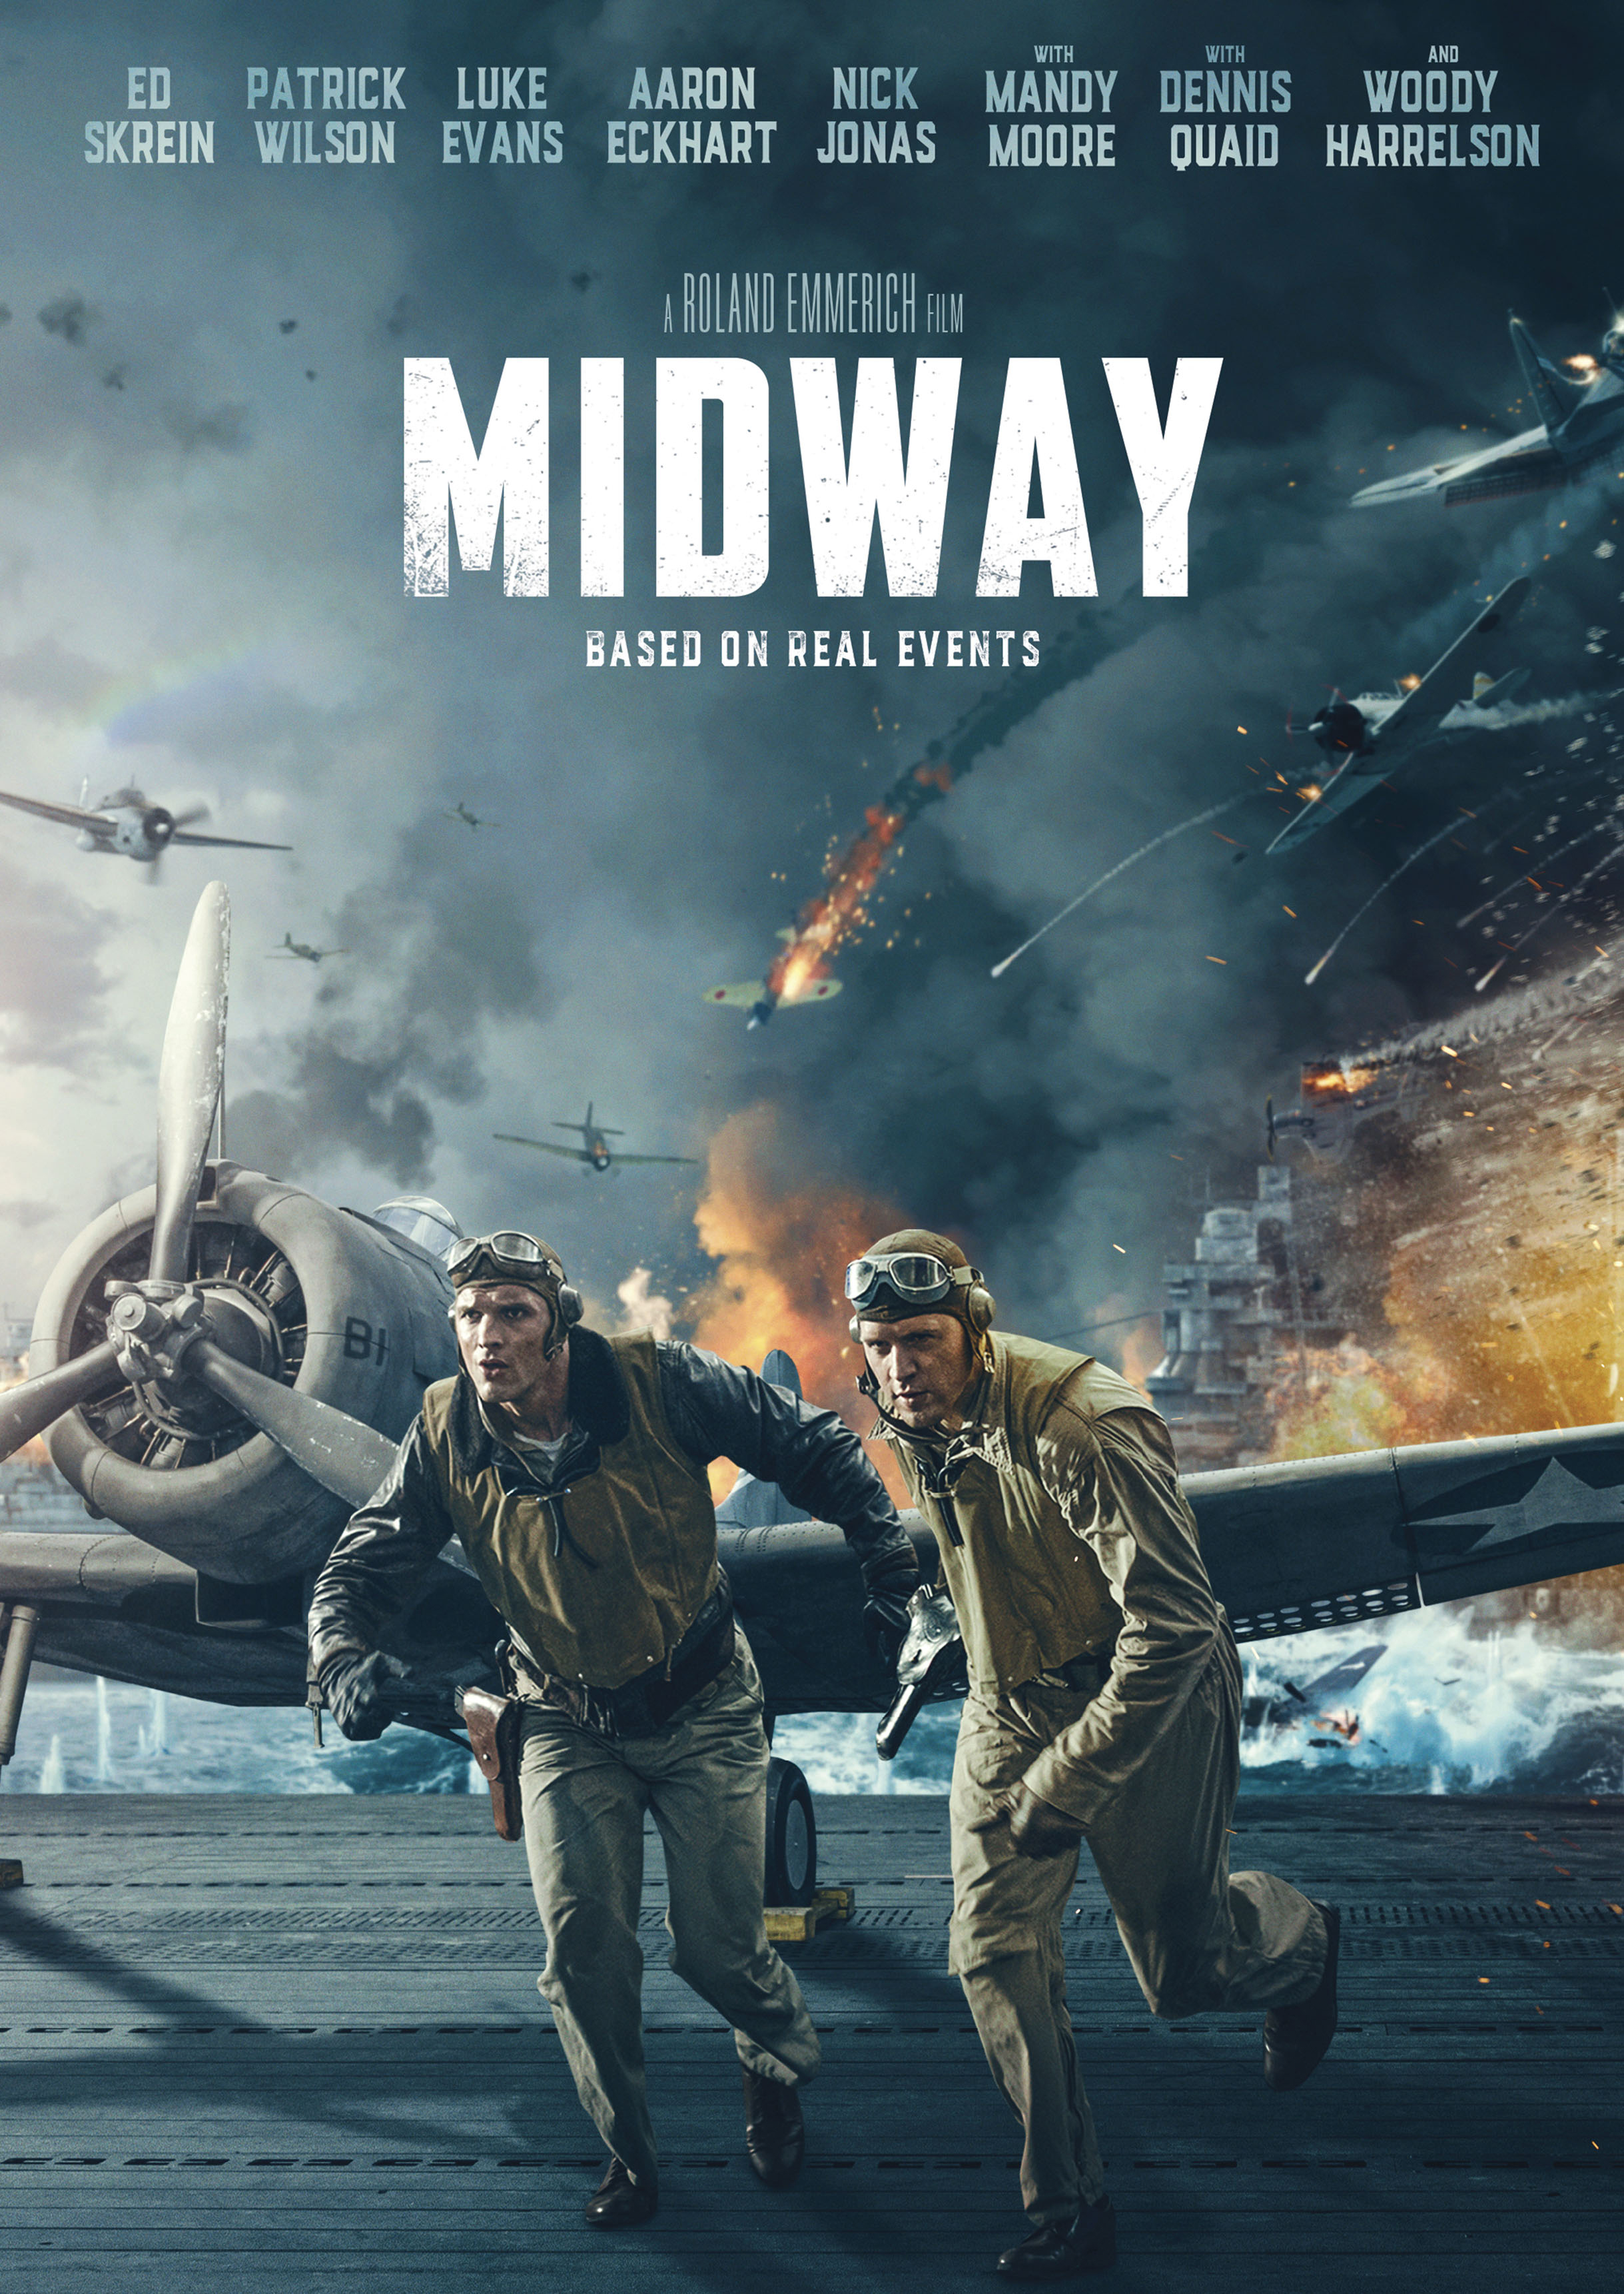 Midway [DVD] (2019).  Directed by Roland Emmerich.